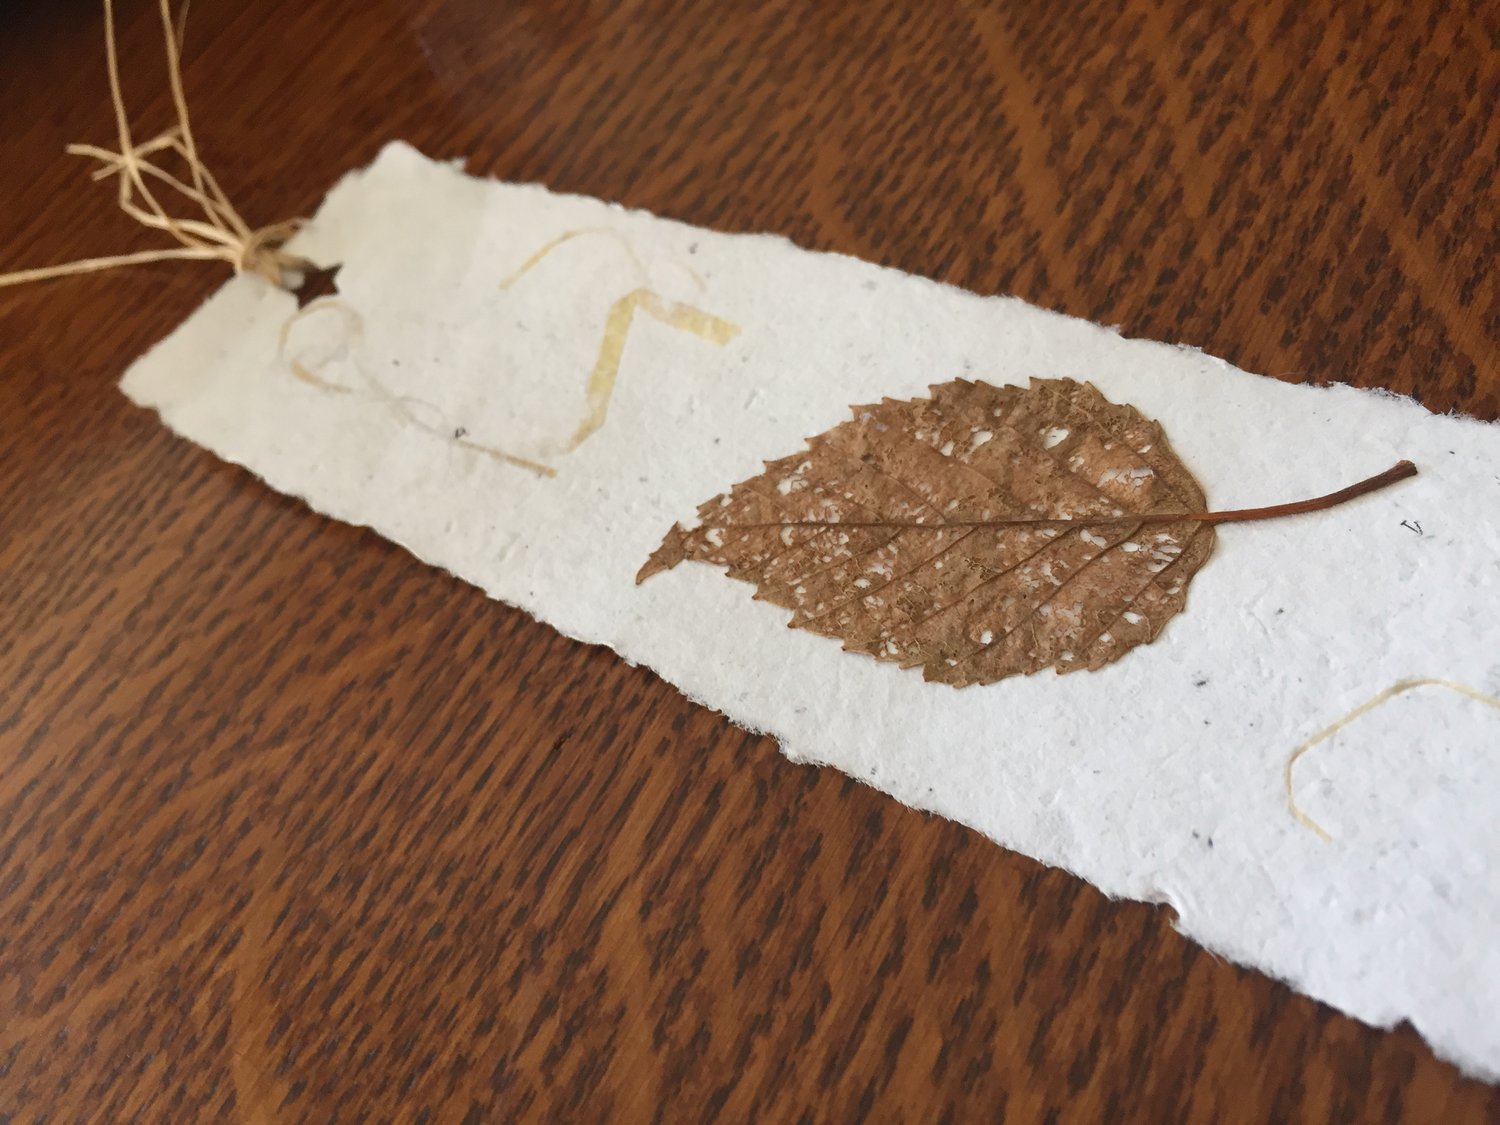 Wooden Deckle Paper Making Kits and Supplies - We have a limited amount of  these Mini Bookmark Papermaking Kits available at an inflation busting  price. Normally we only make these available for